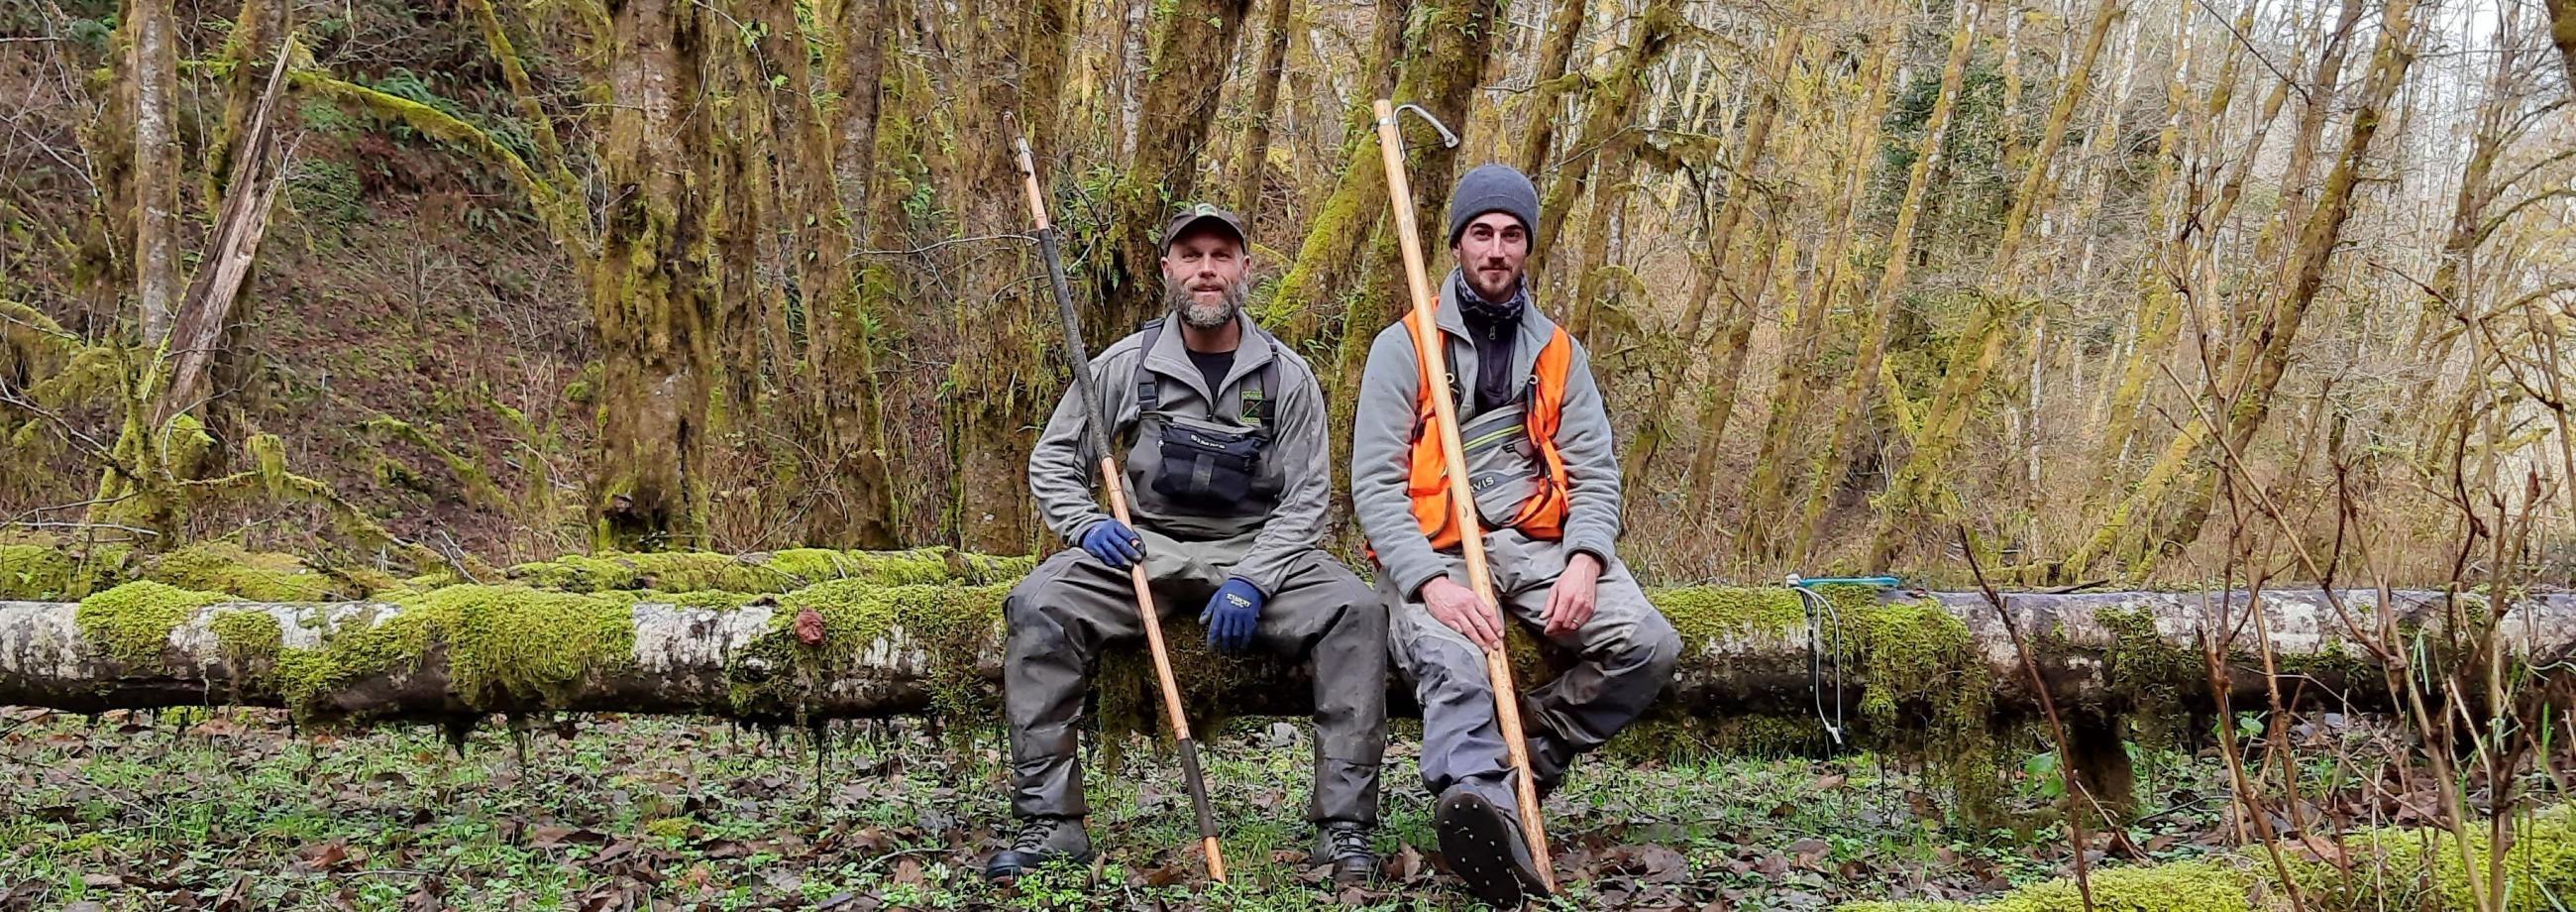 Two male surveyors smile while sitting on a log in the forest.